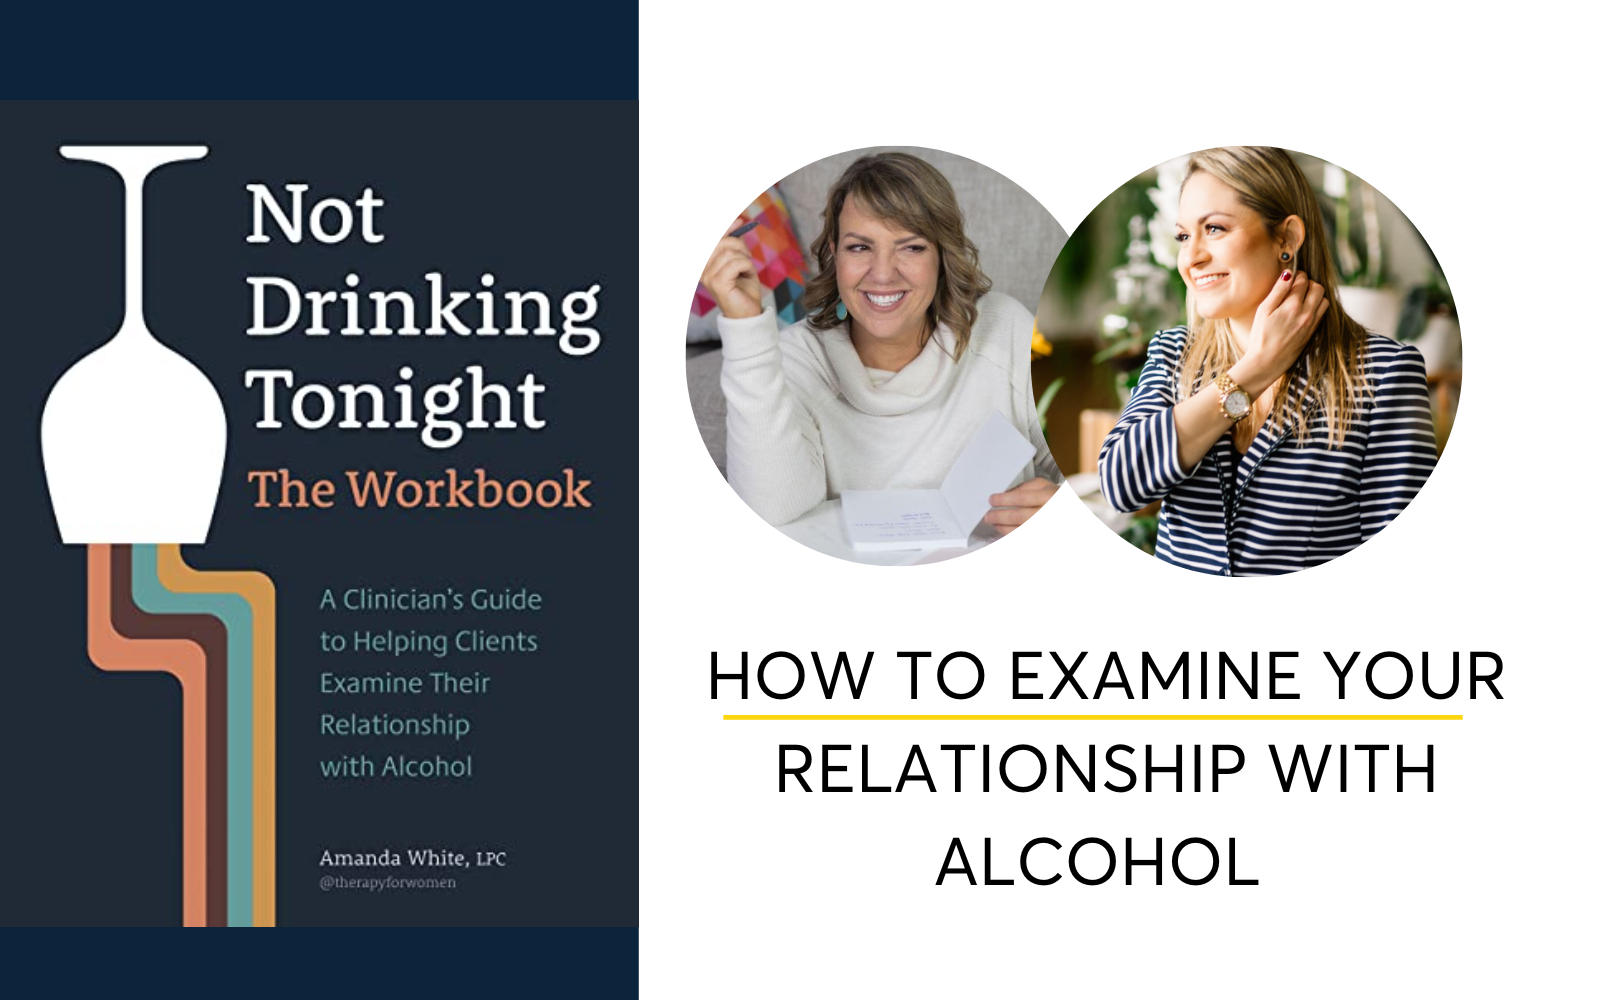 How To Examine Your Relationship With Alcohol